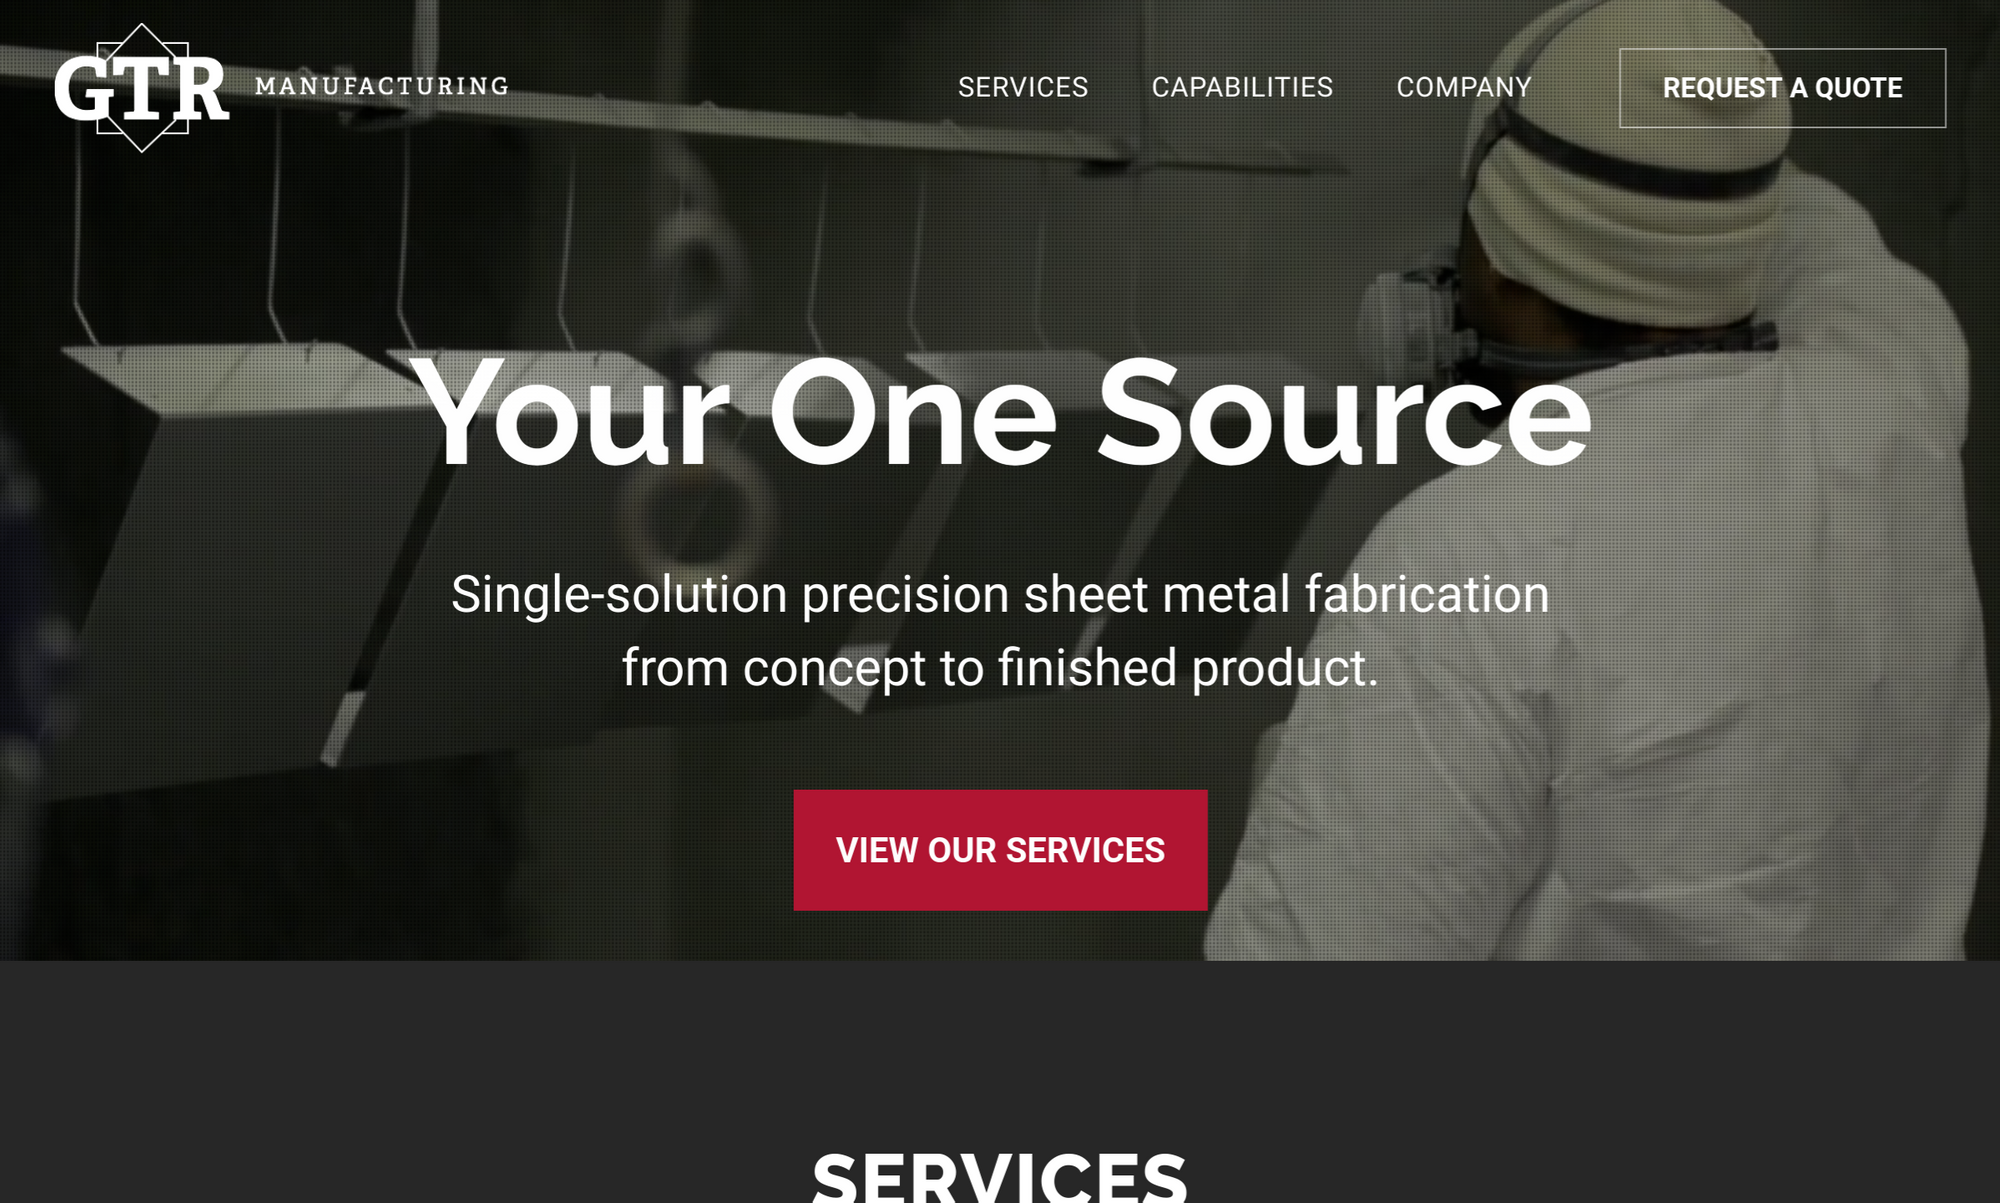 Three Essential Sections That Any Manufacturing Supplier Should Have on Their Website